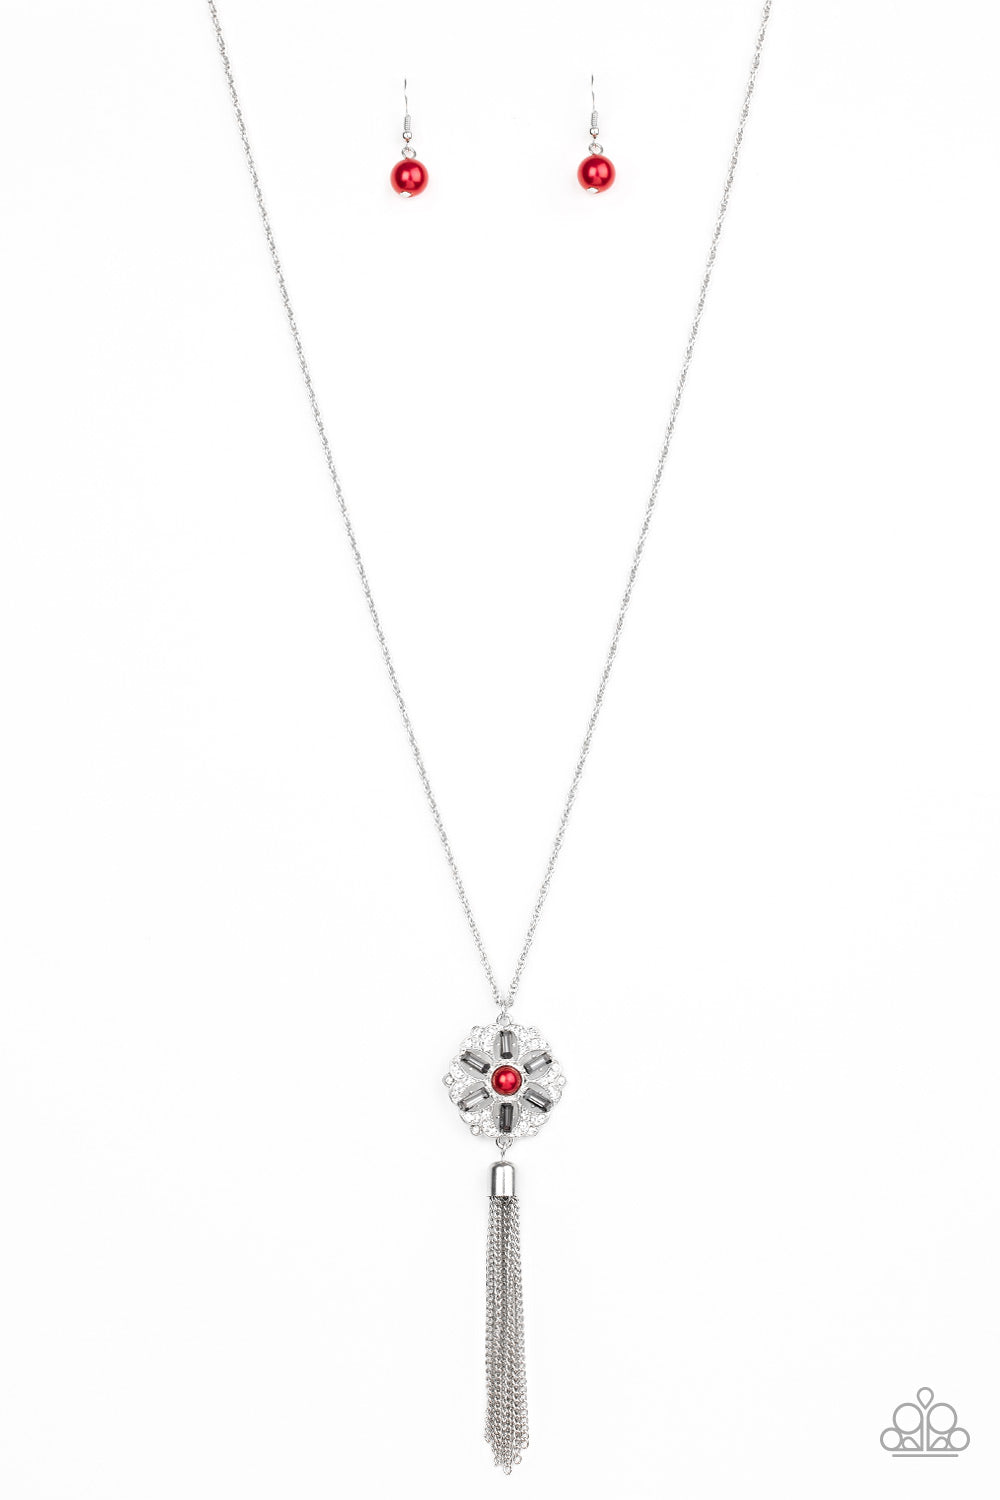 Paparazzi Accessories - Fine Florals - Red Necklace - Alies Bling Bar